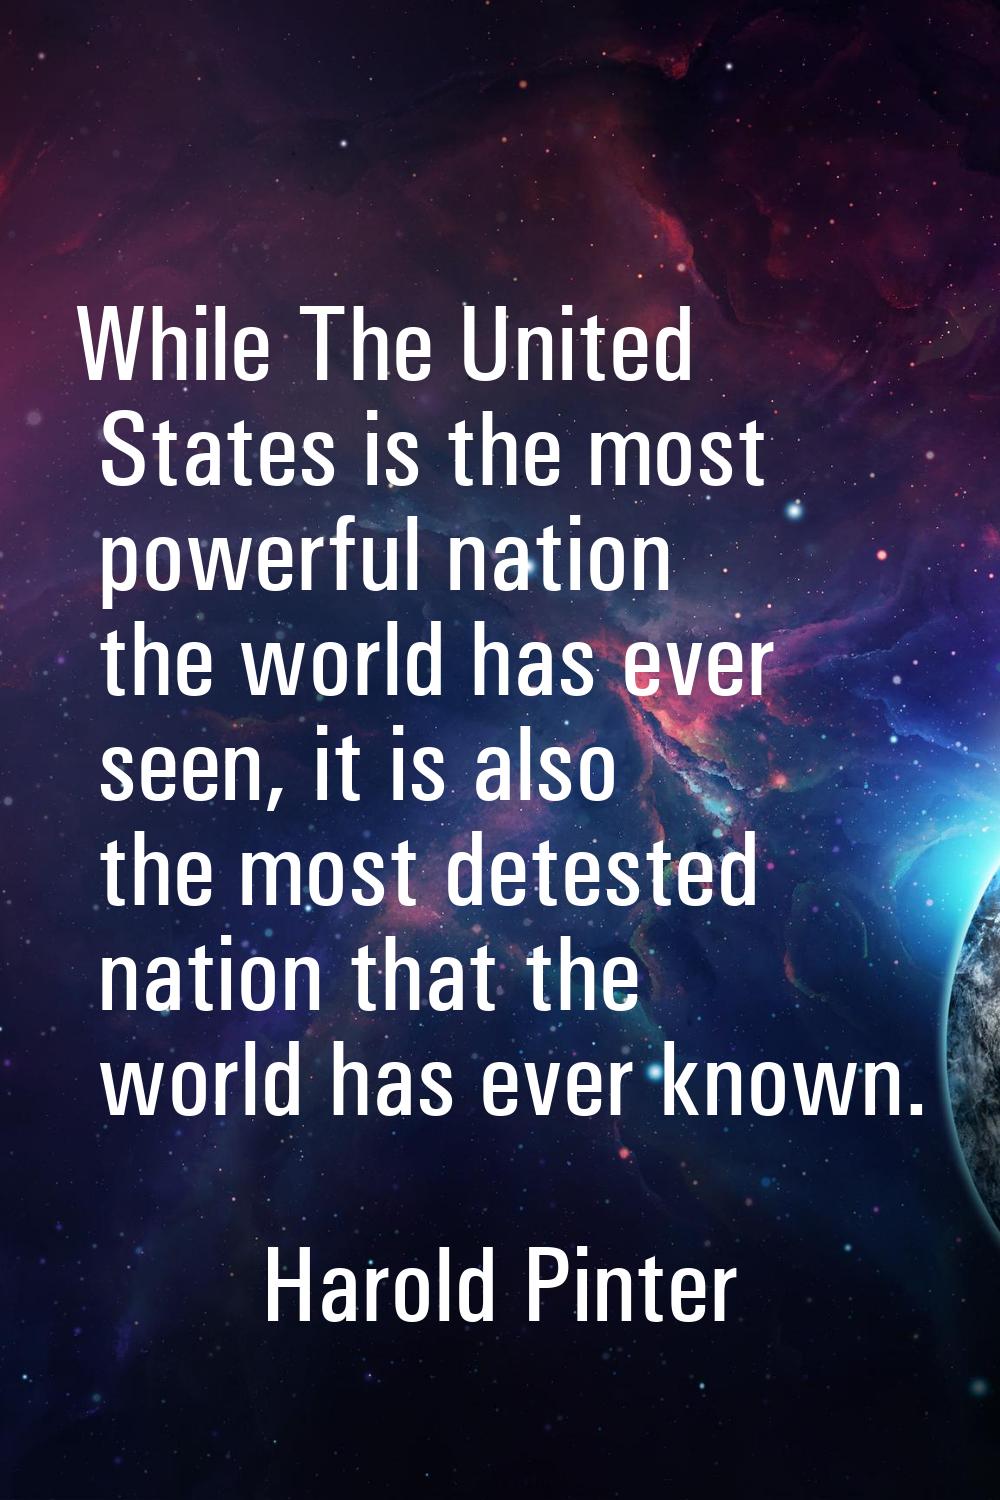 While The United States is the most powerful nation the world has ever seen, it is also the most de